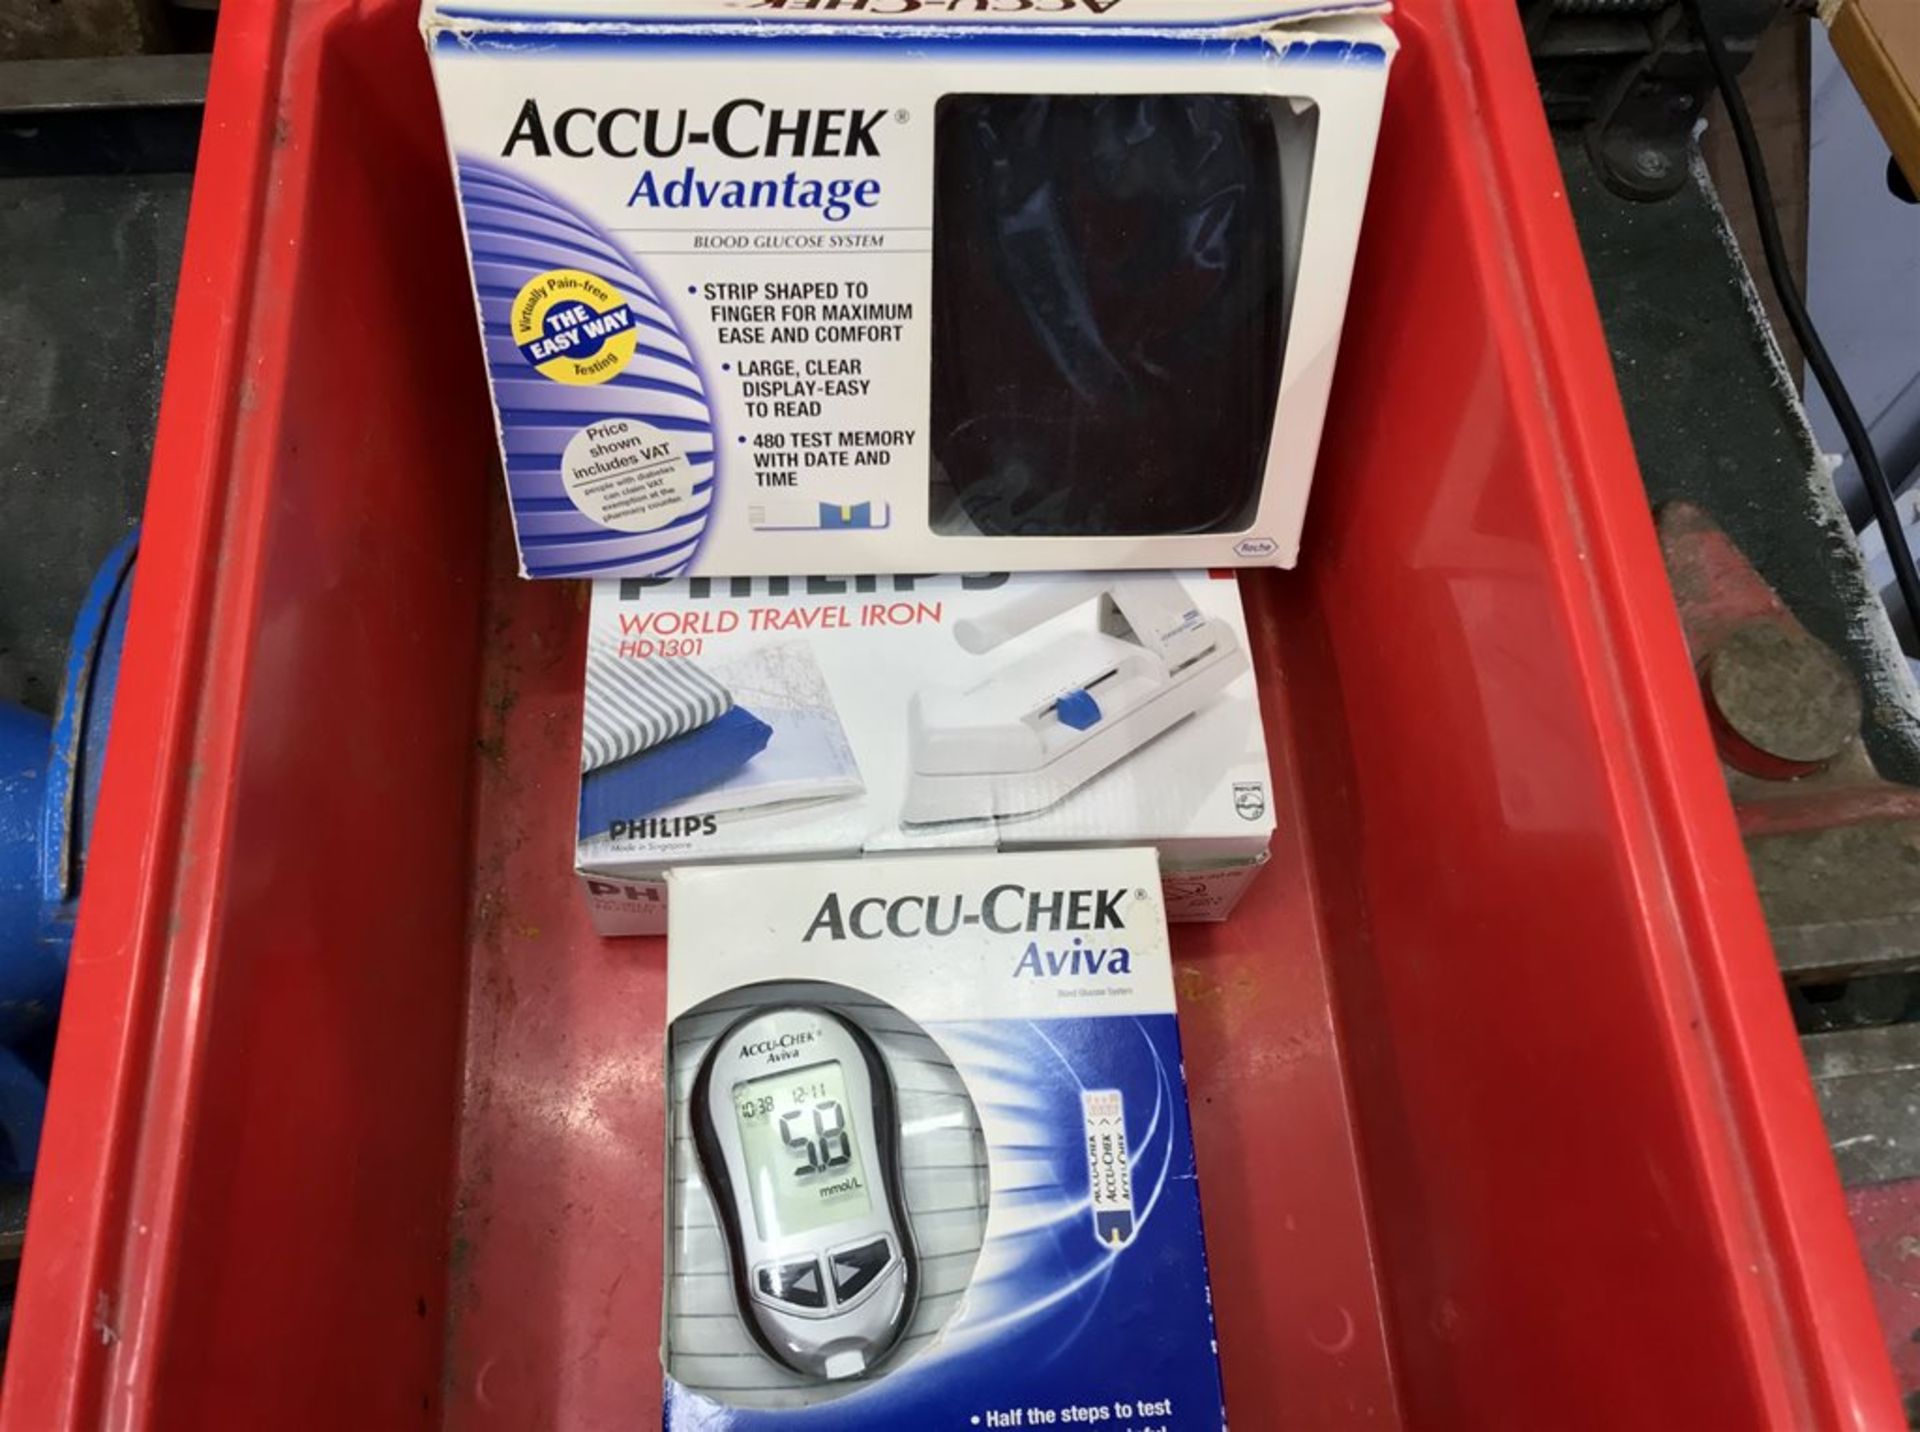 A Quantity of NEW Blood Glucose Testers and a Brand New Travel Iron